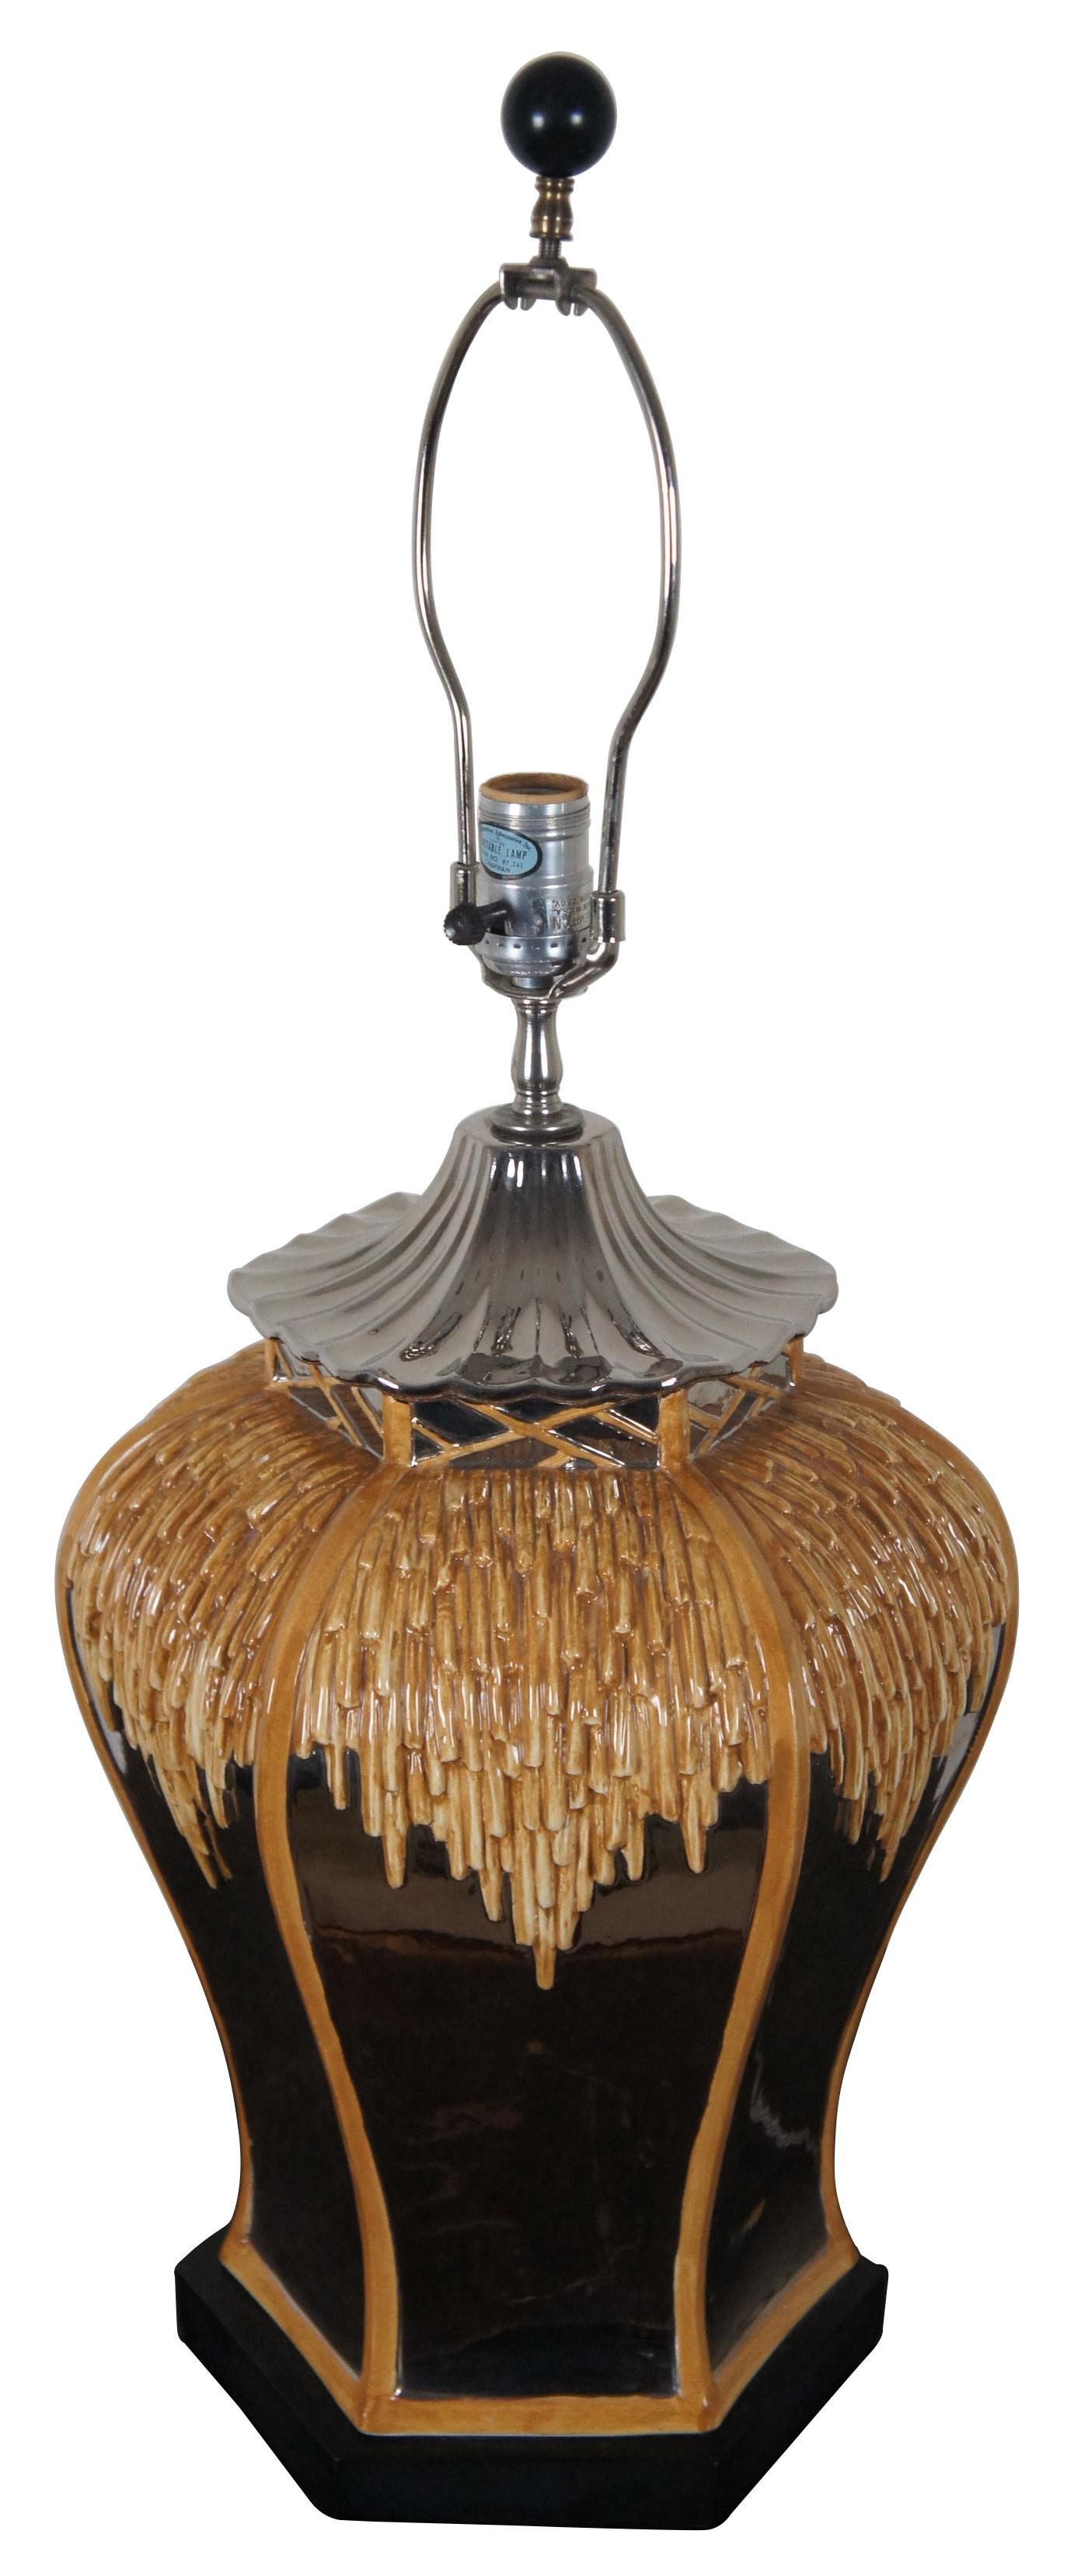 Chinoiserie Mirrored Porcelain Thatched Pagoda Octagon Ginger Jar Table Lamp In Good Condition For Sale In Dayton, OH